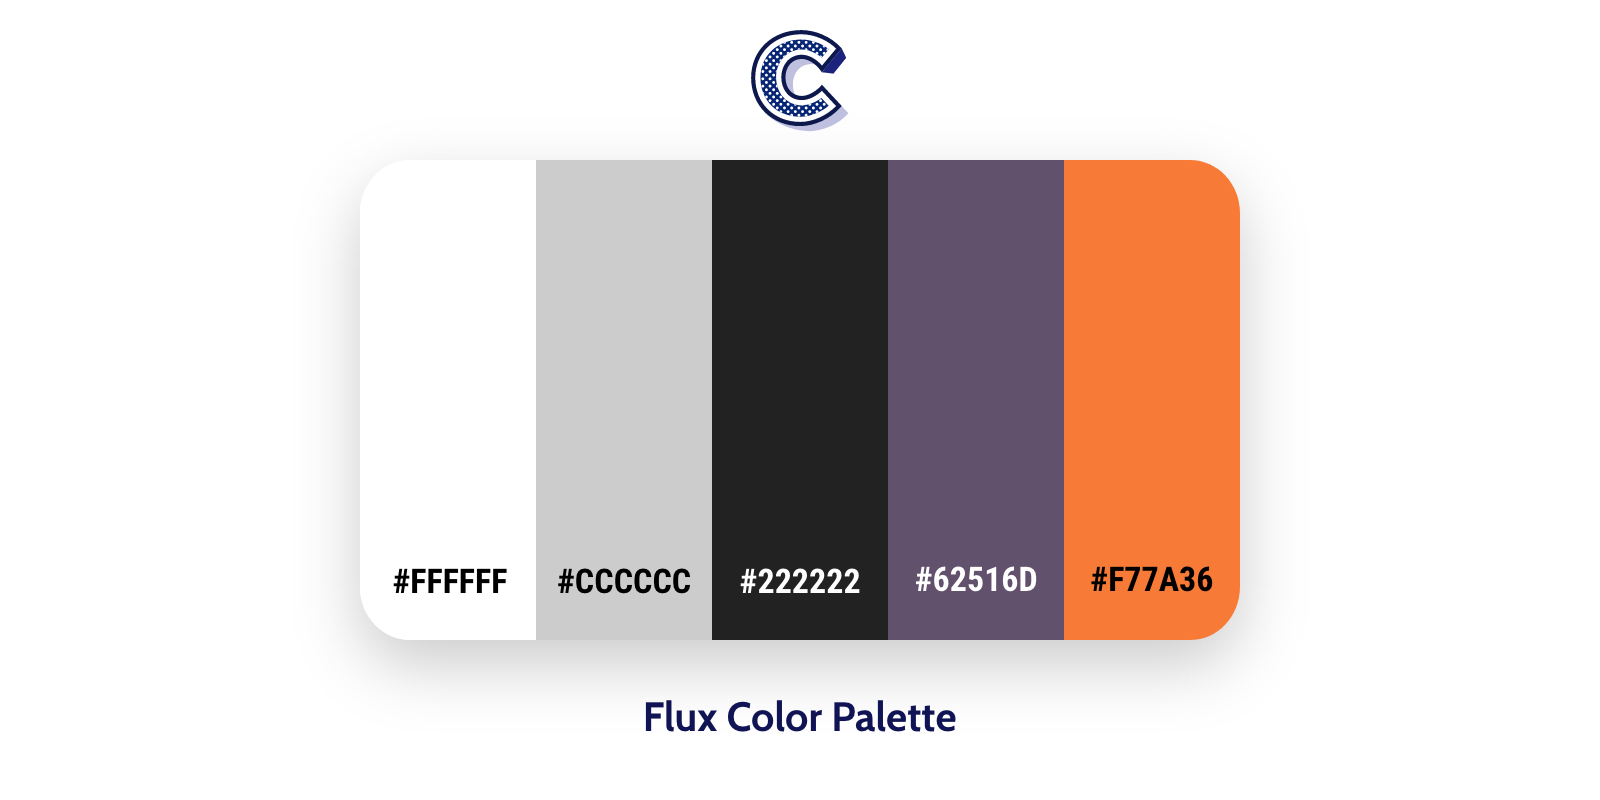 the feautured image of flux color palette